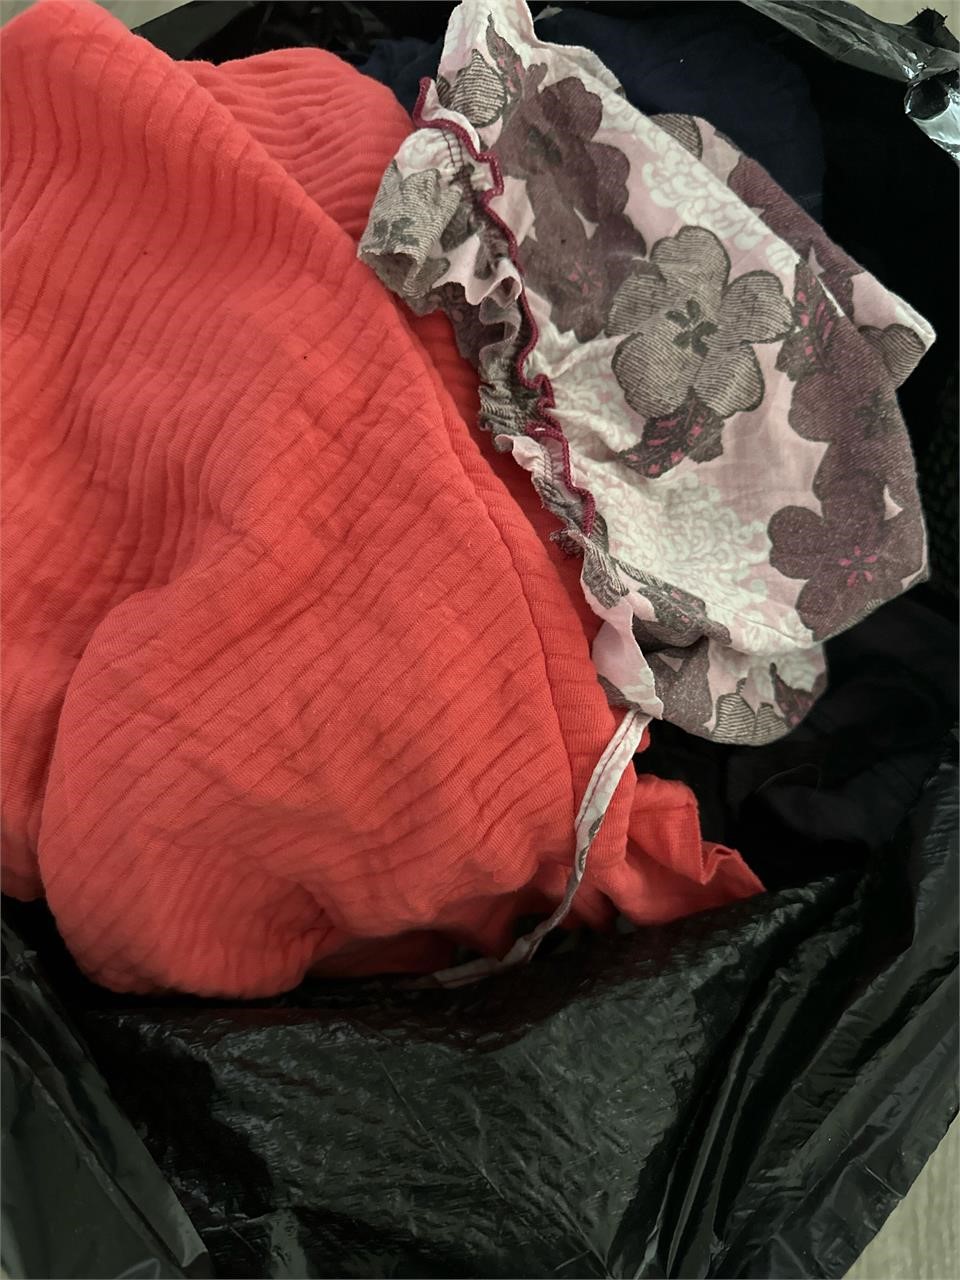 Bag Full Of Cut Up Pieces Of Clothing